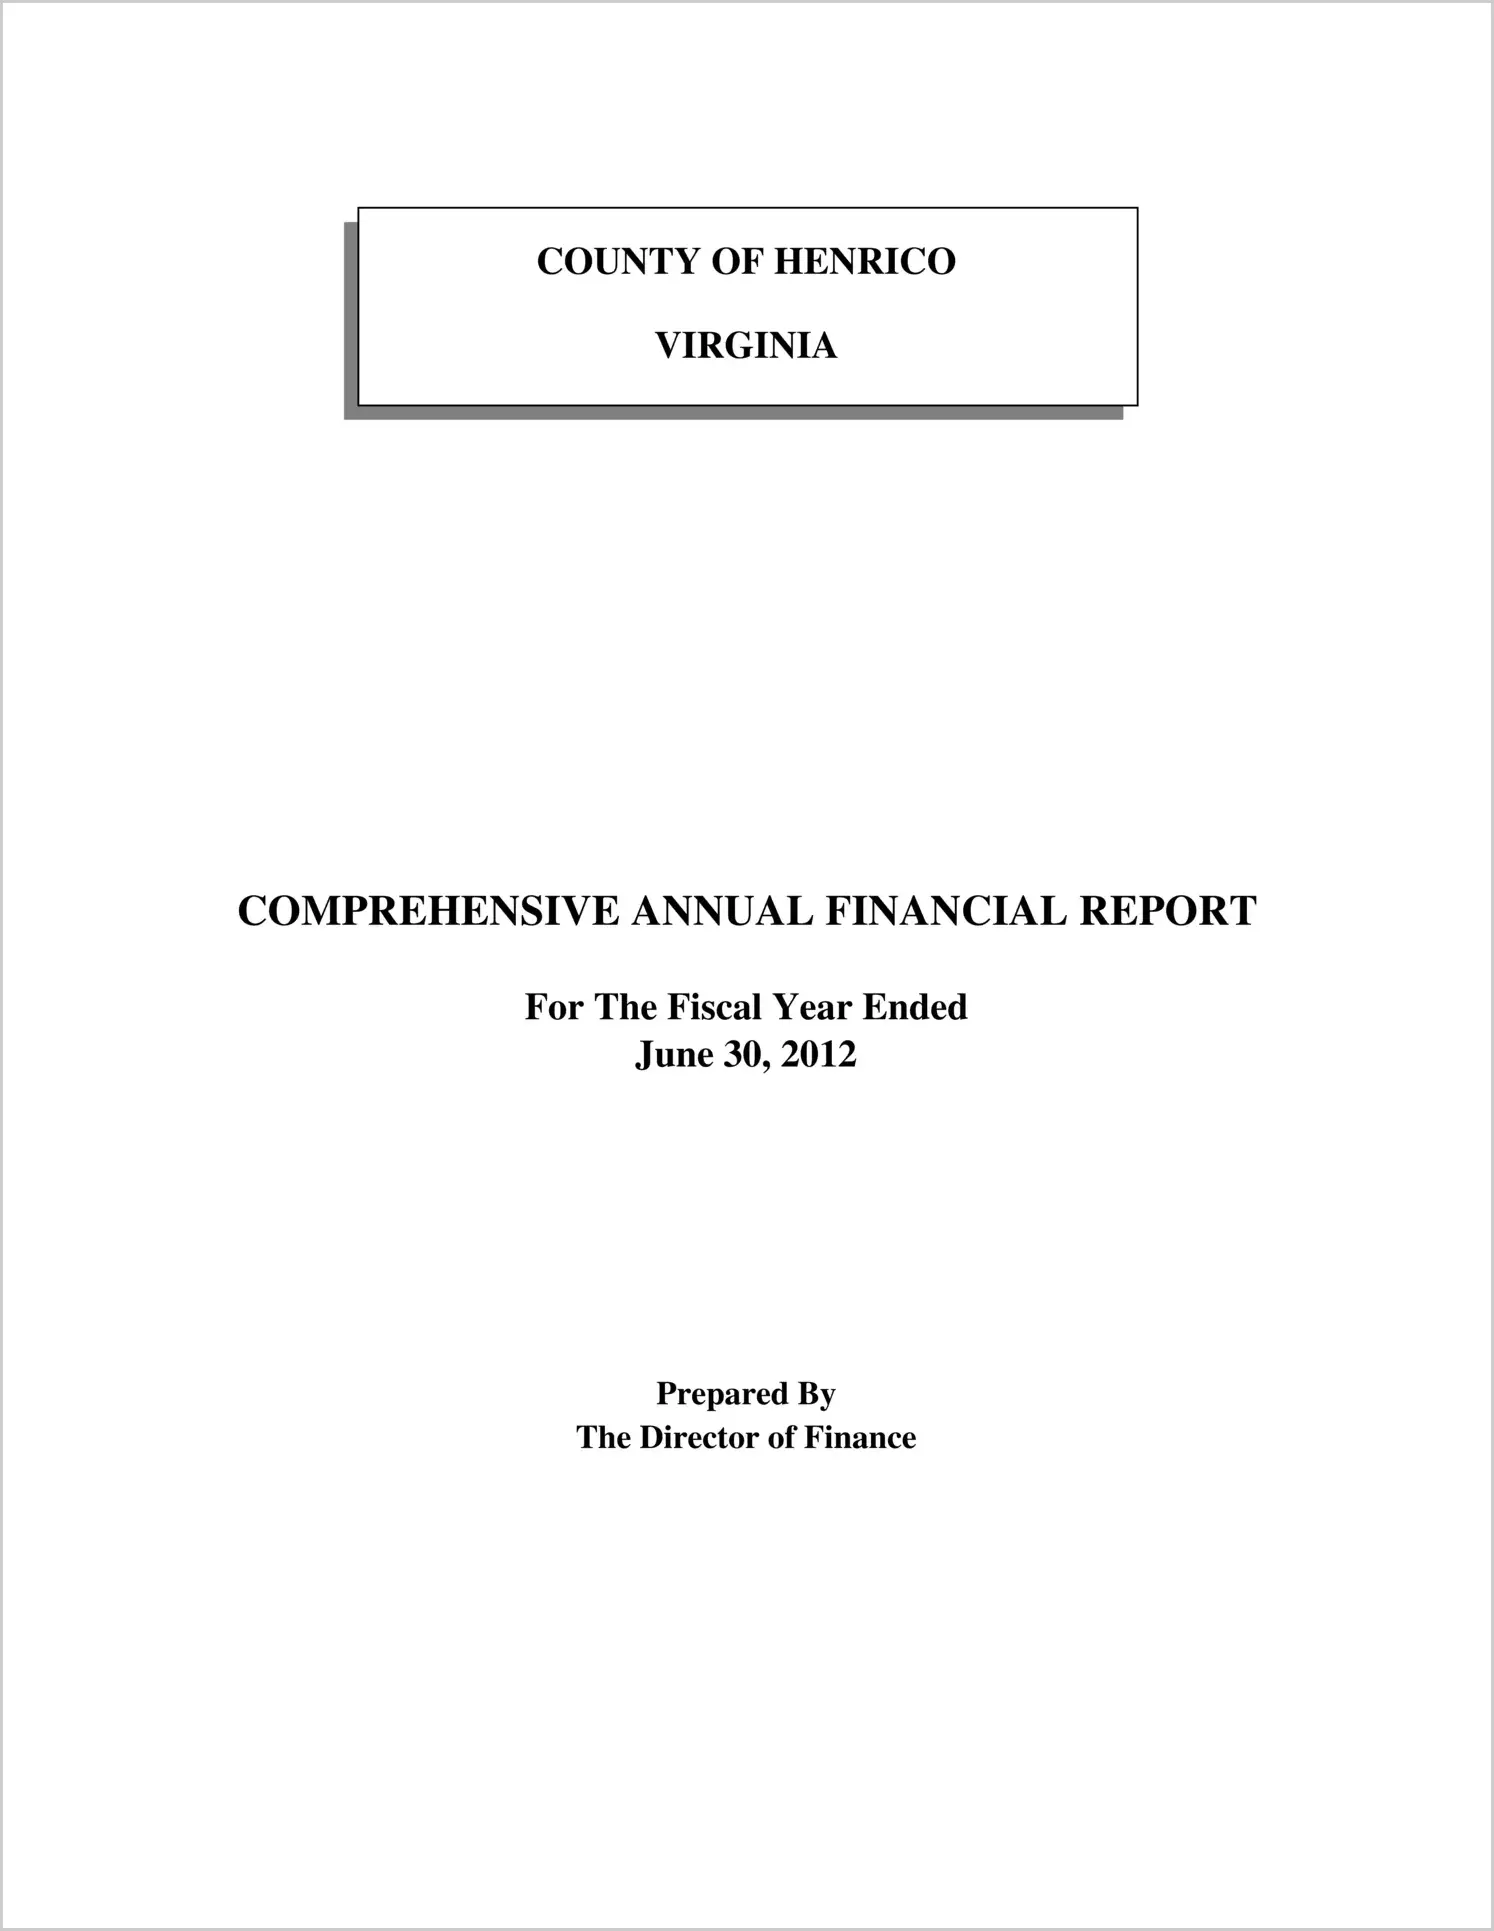 2012 Annual Financial Report for County of Henrico